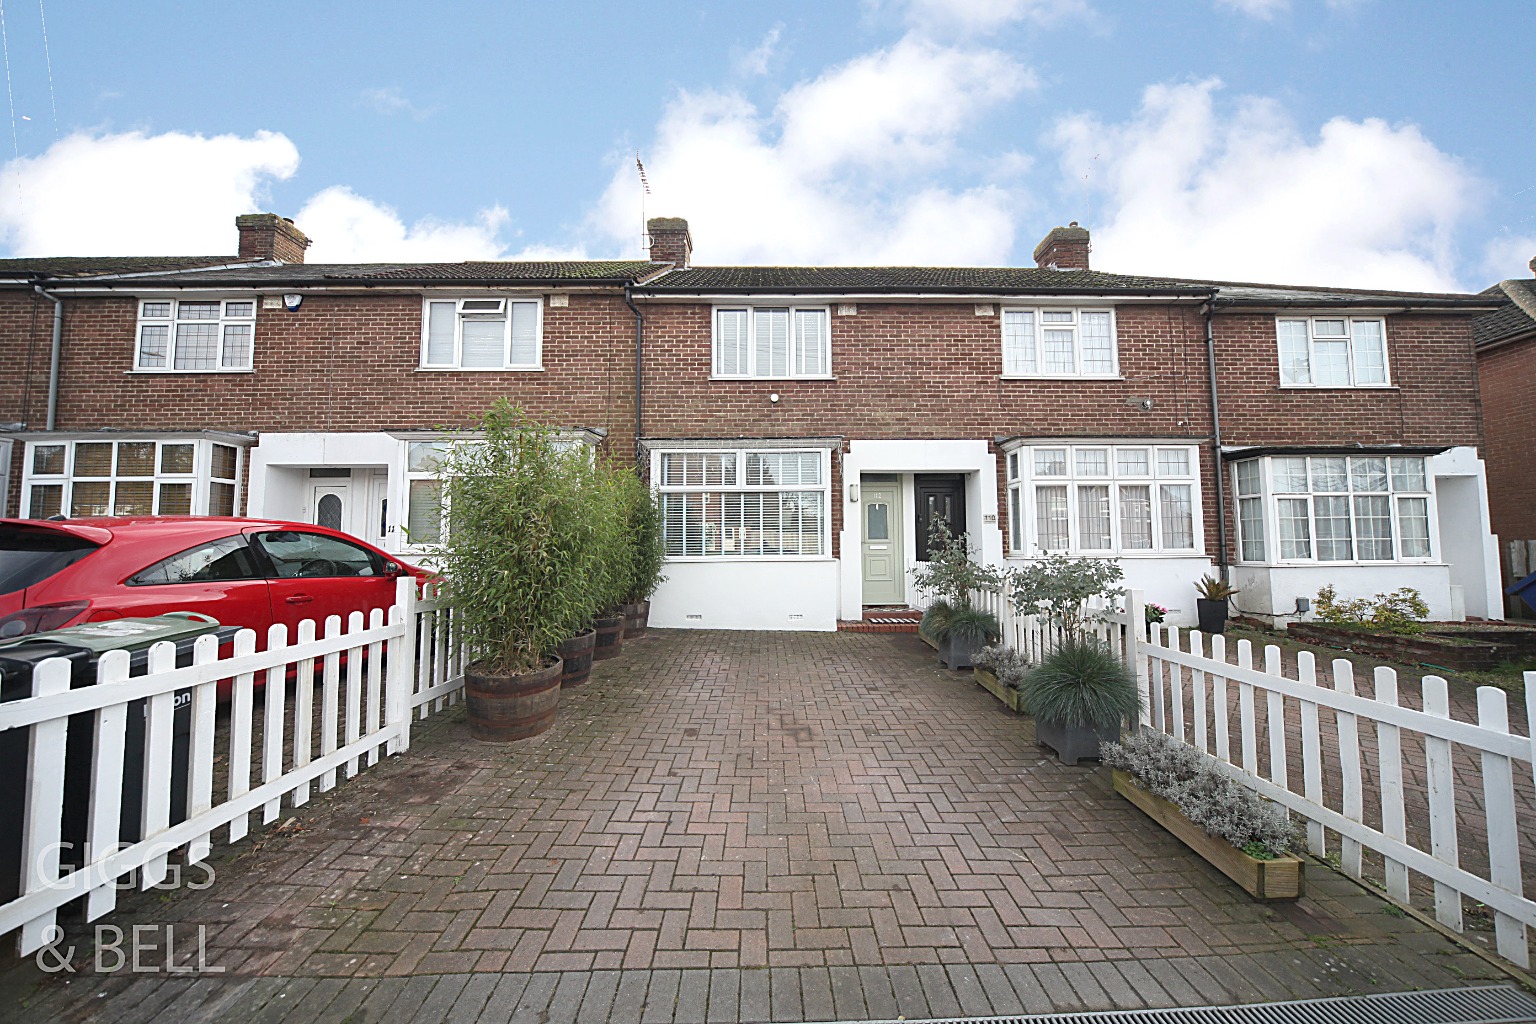 2 bed terraced house for sale in Putteridge Road, Luton - Property Image 1